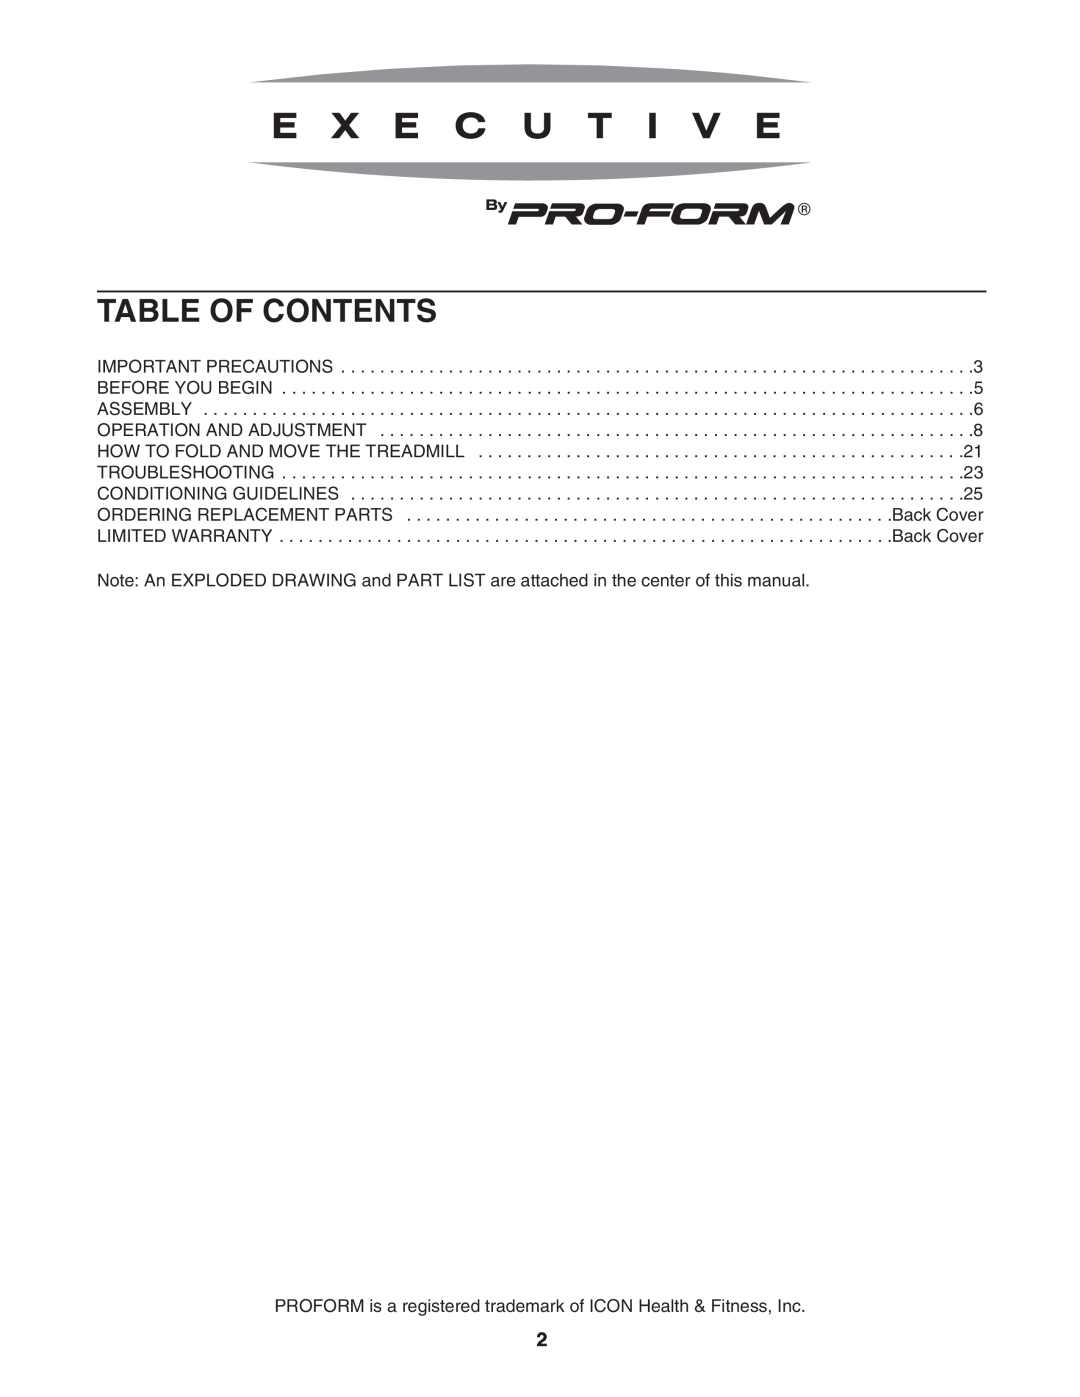 ProForm HGTL09111O, HGTL09111M Table Of Contents, PROFORM is a registered trademark of ICON Health & Fitness, Inc 